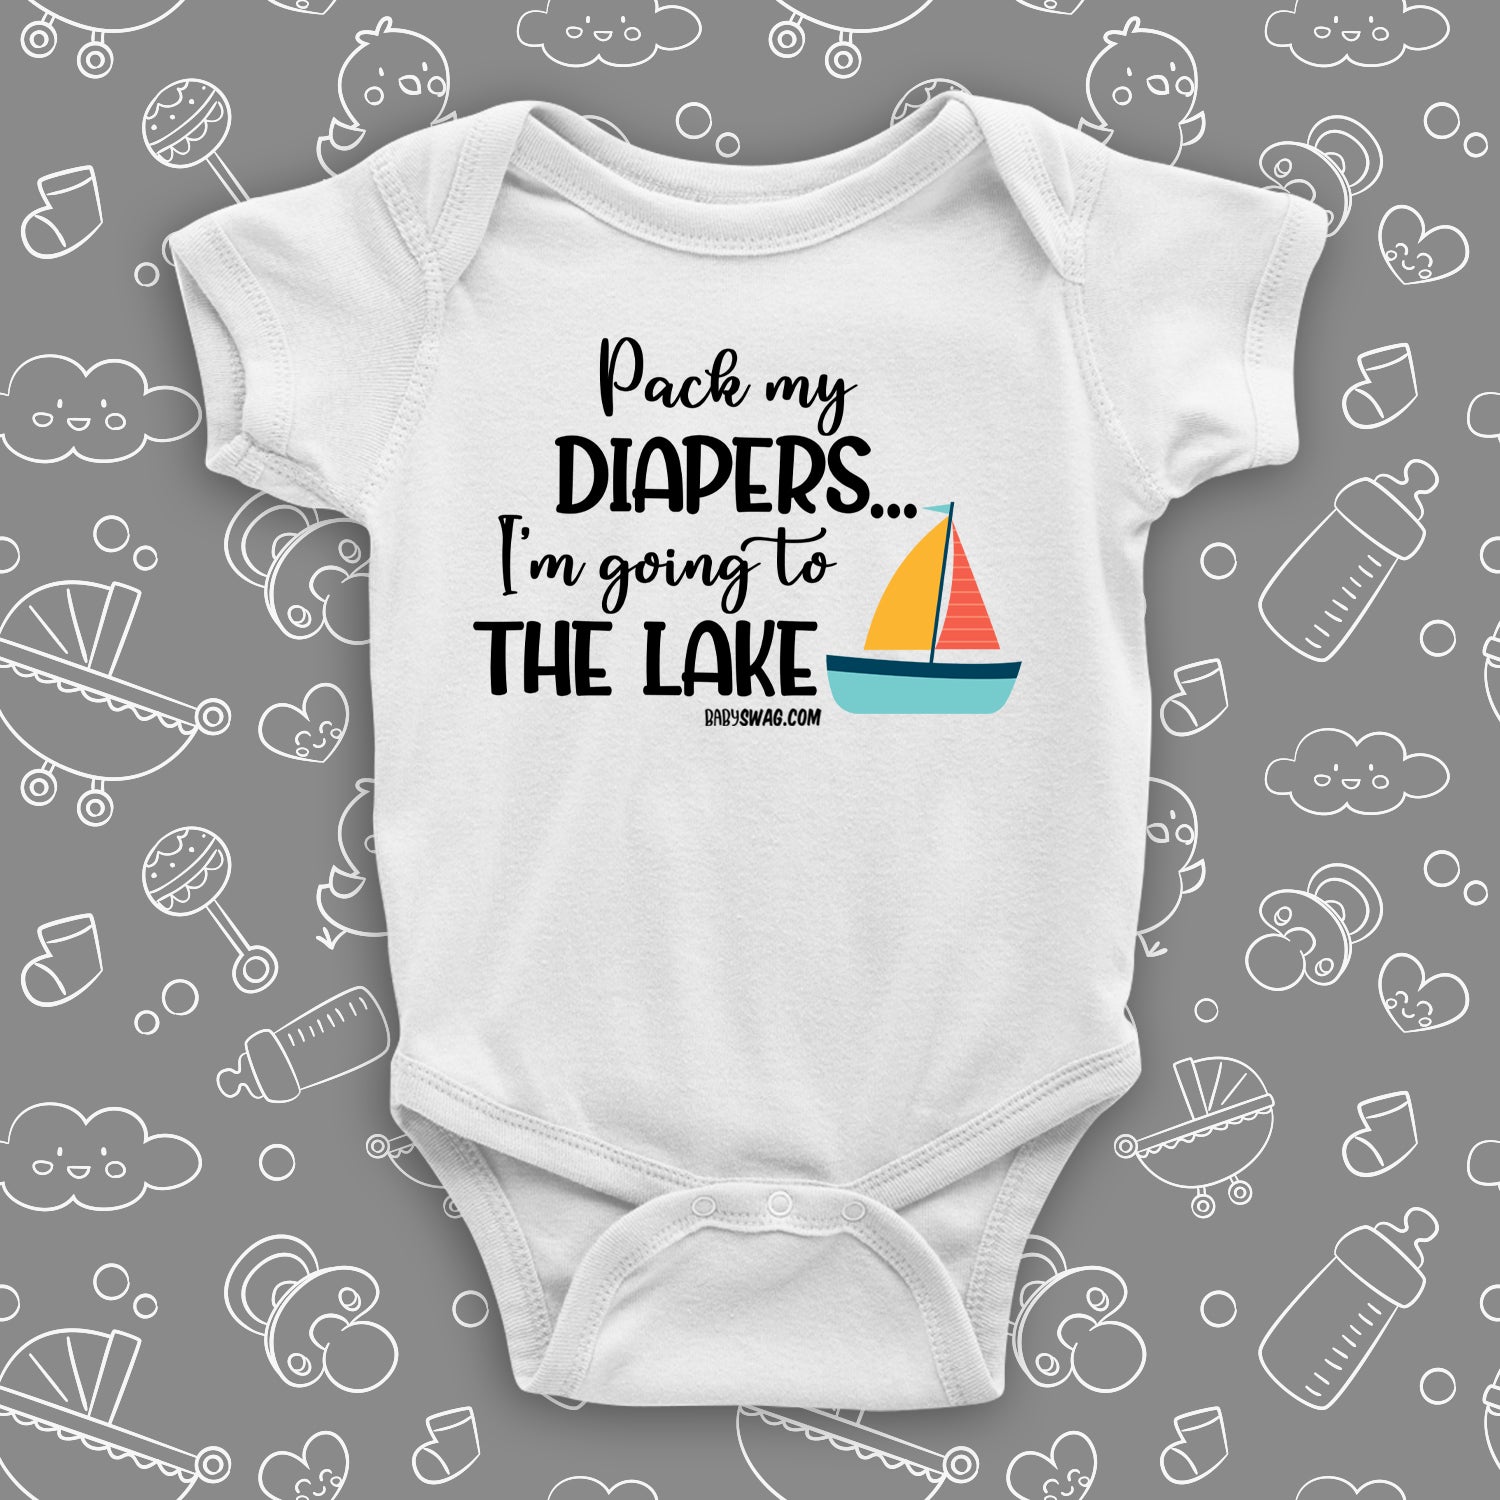 The ''Pack My Diapers, I'm Going To The Lake'' swag baby clothes in white. 